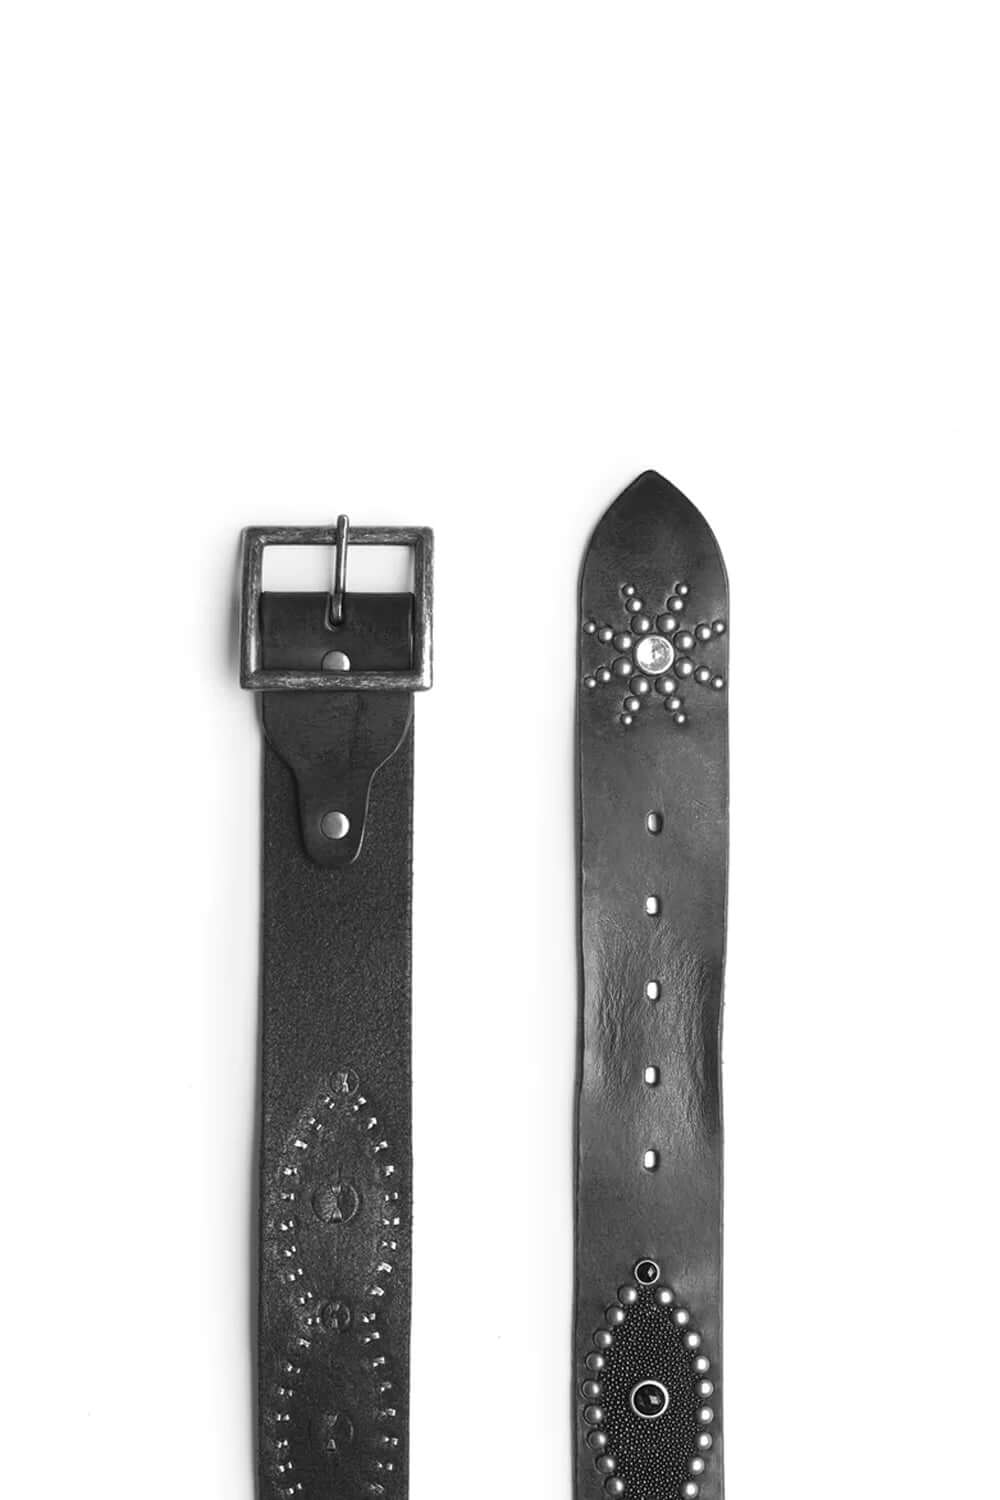 PASADENA BELT Black leather belt with studs and rhinestones. Brass buckle. Height: 4 cm. HTC LOS ANGELES